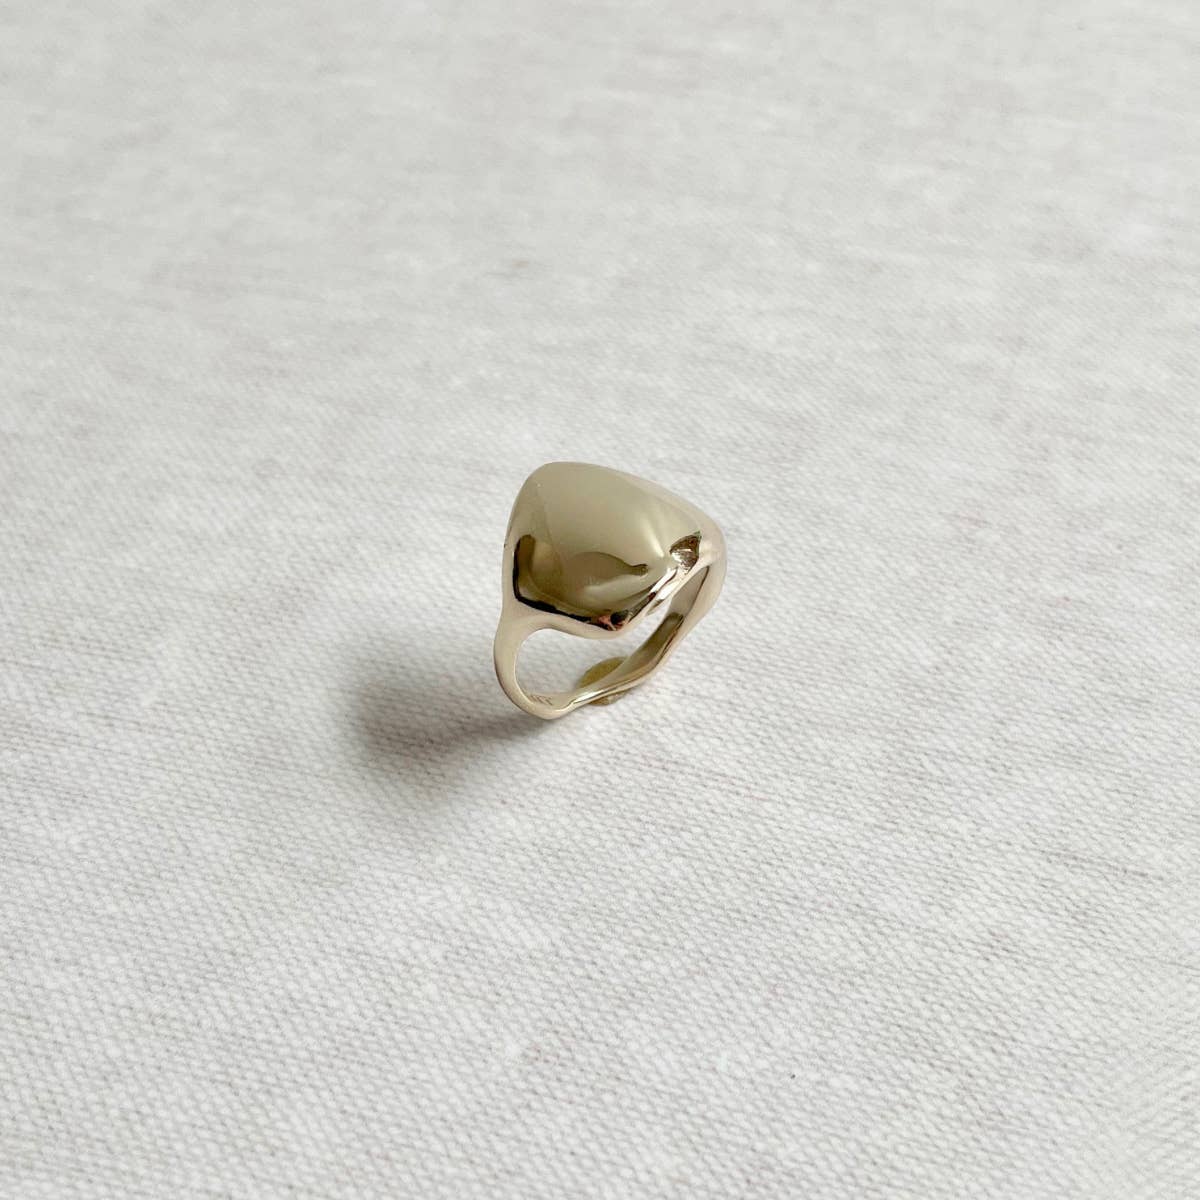 The melted signet artisan ring by Species by the Thousands. Hand cast brass in wax.